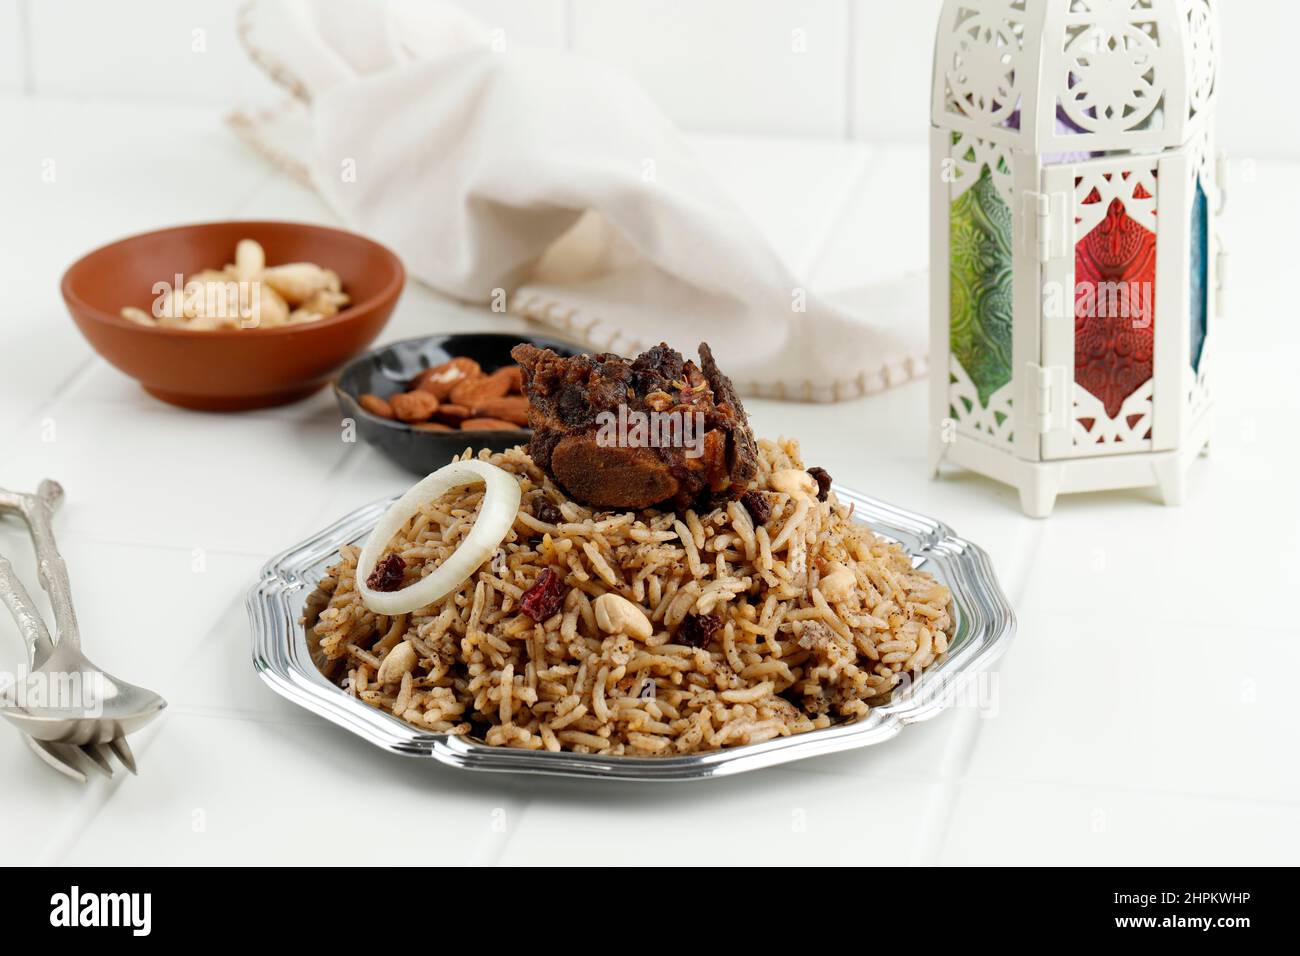 Lamb Madghout, Popular Arabic Rice with Meat Beef or Lamb During Ramadan Stock Photo